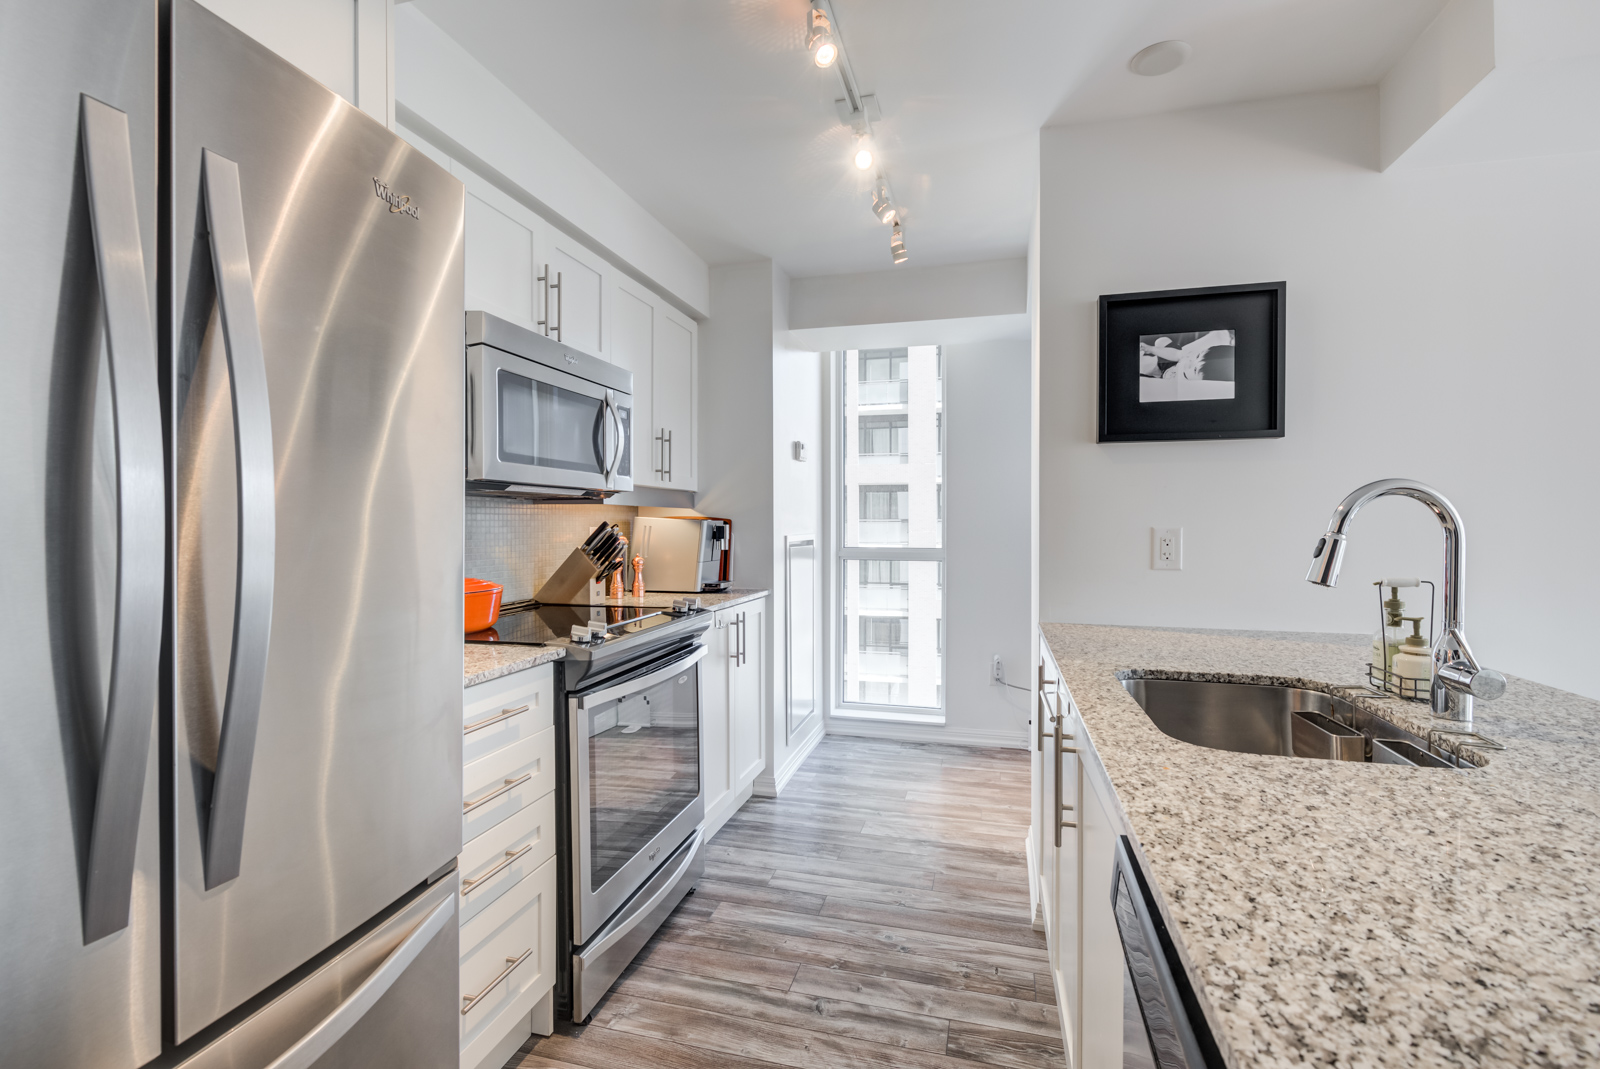  Kitchen and window view of 400 Adelaide St E Unit 704 condos in Moss Park.